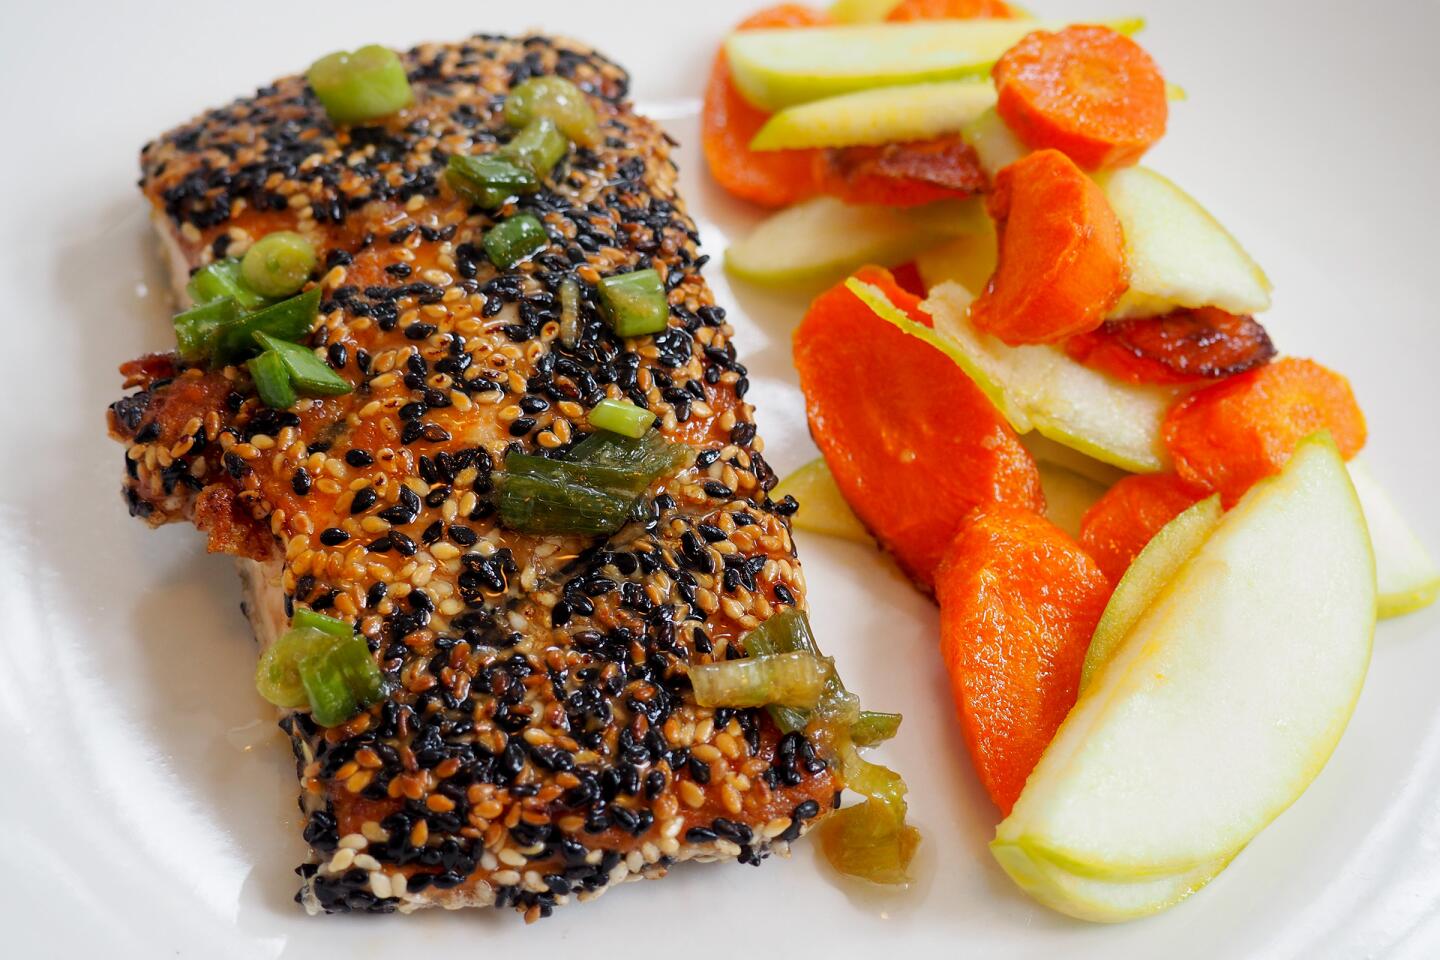 The Sun Basket sesame salmon with scallion ginger sauce and roasted carrot and apple salad